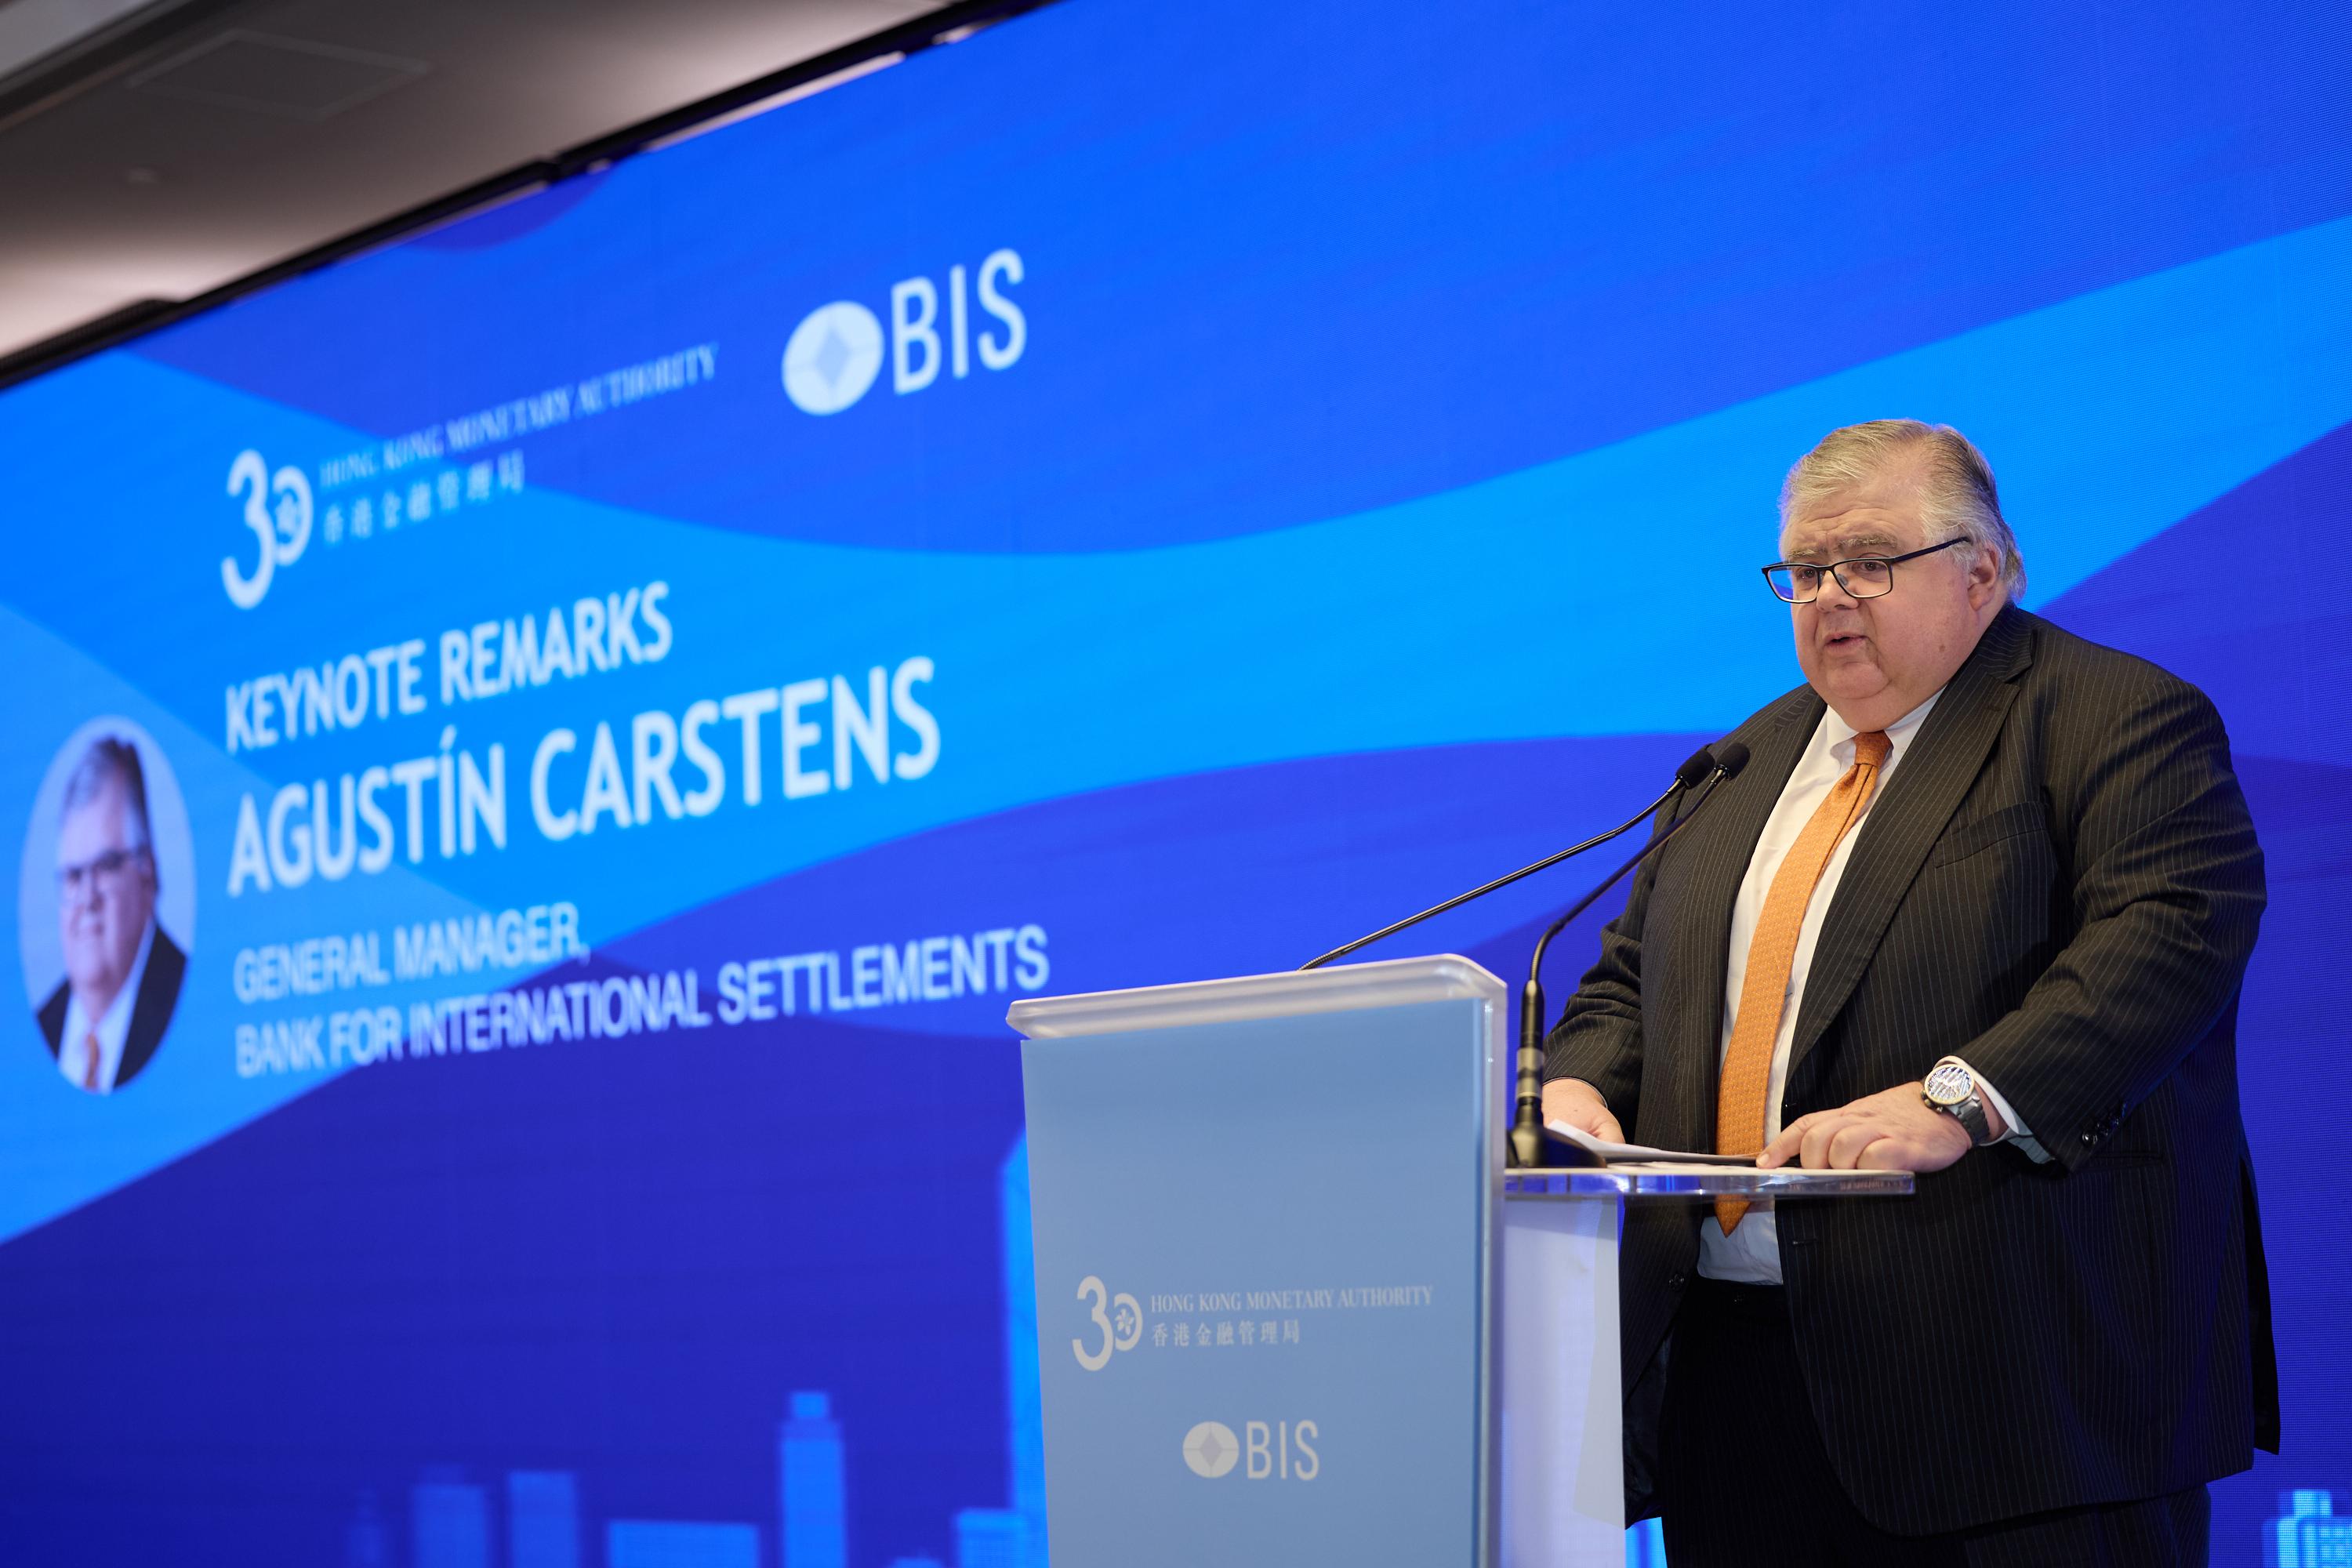 The General Manager of the Bank for International Settlements, Mr Agustín Carstens, delivers keynote remarks at the HKMA-BIS High-Level Conference today (November 28).